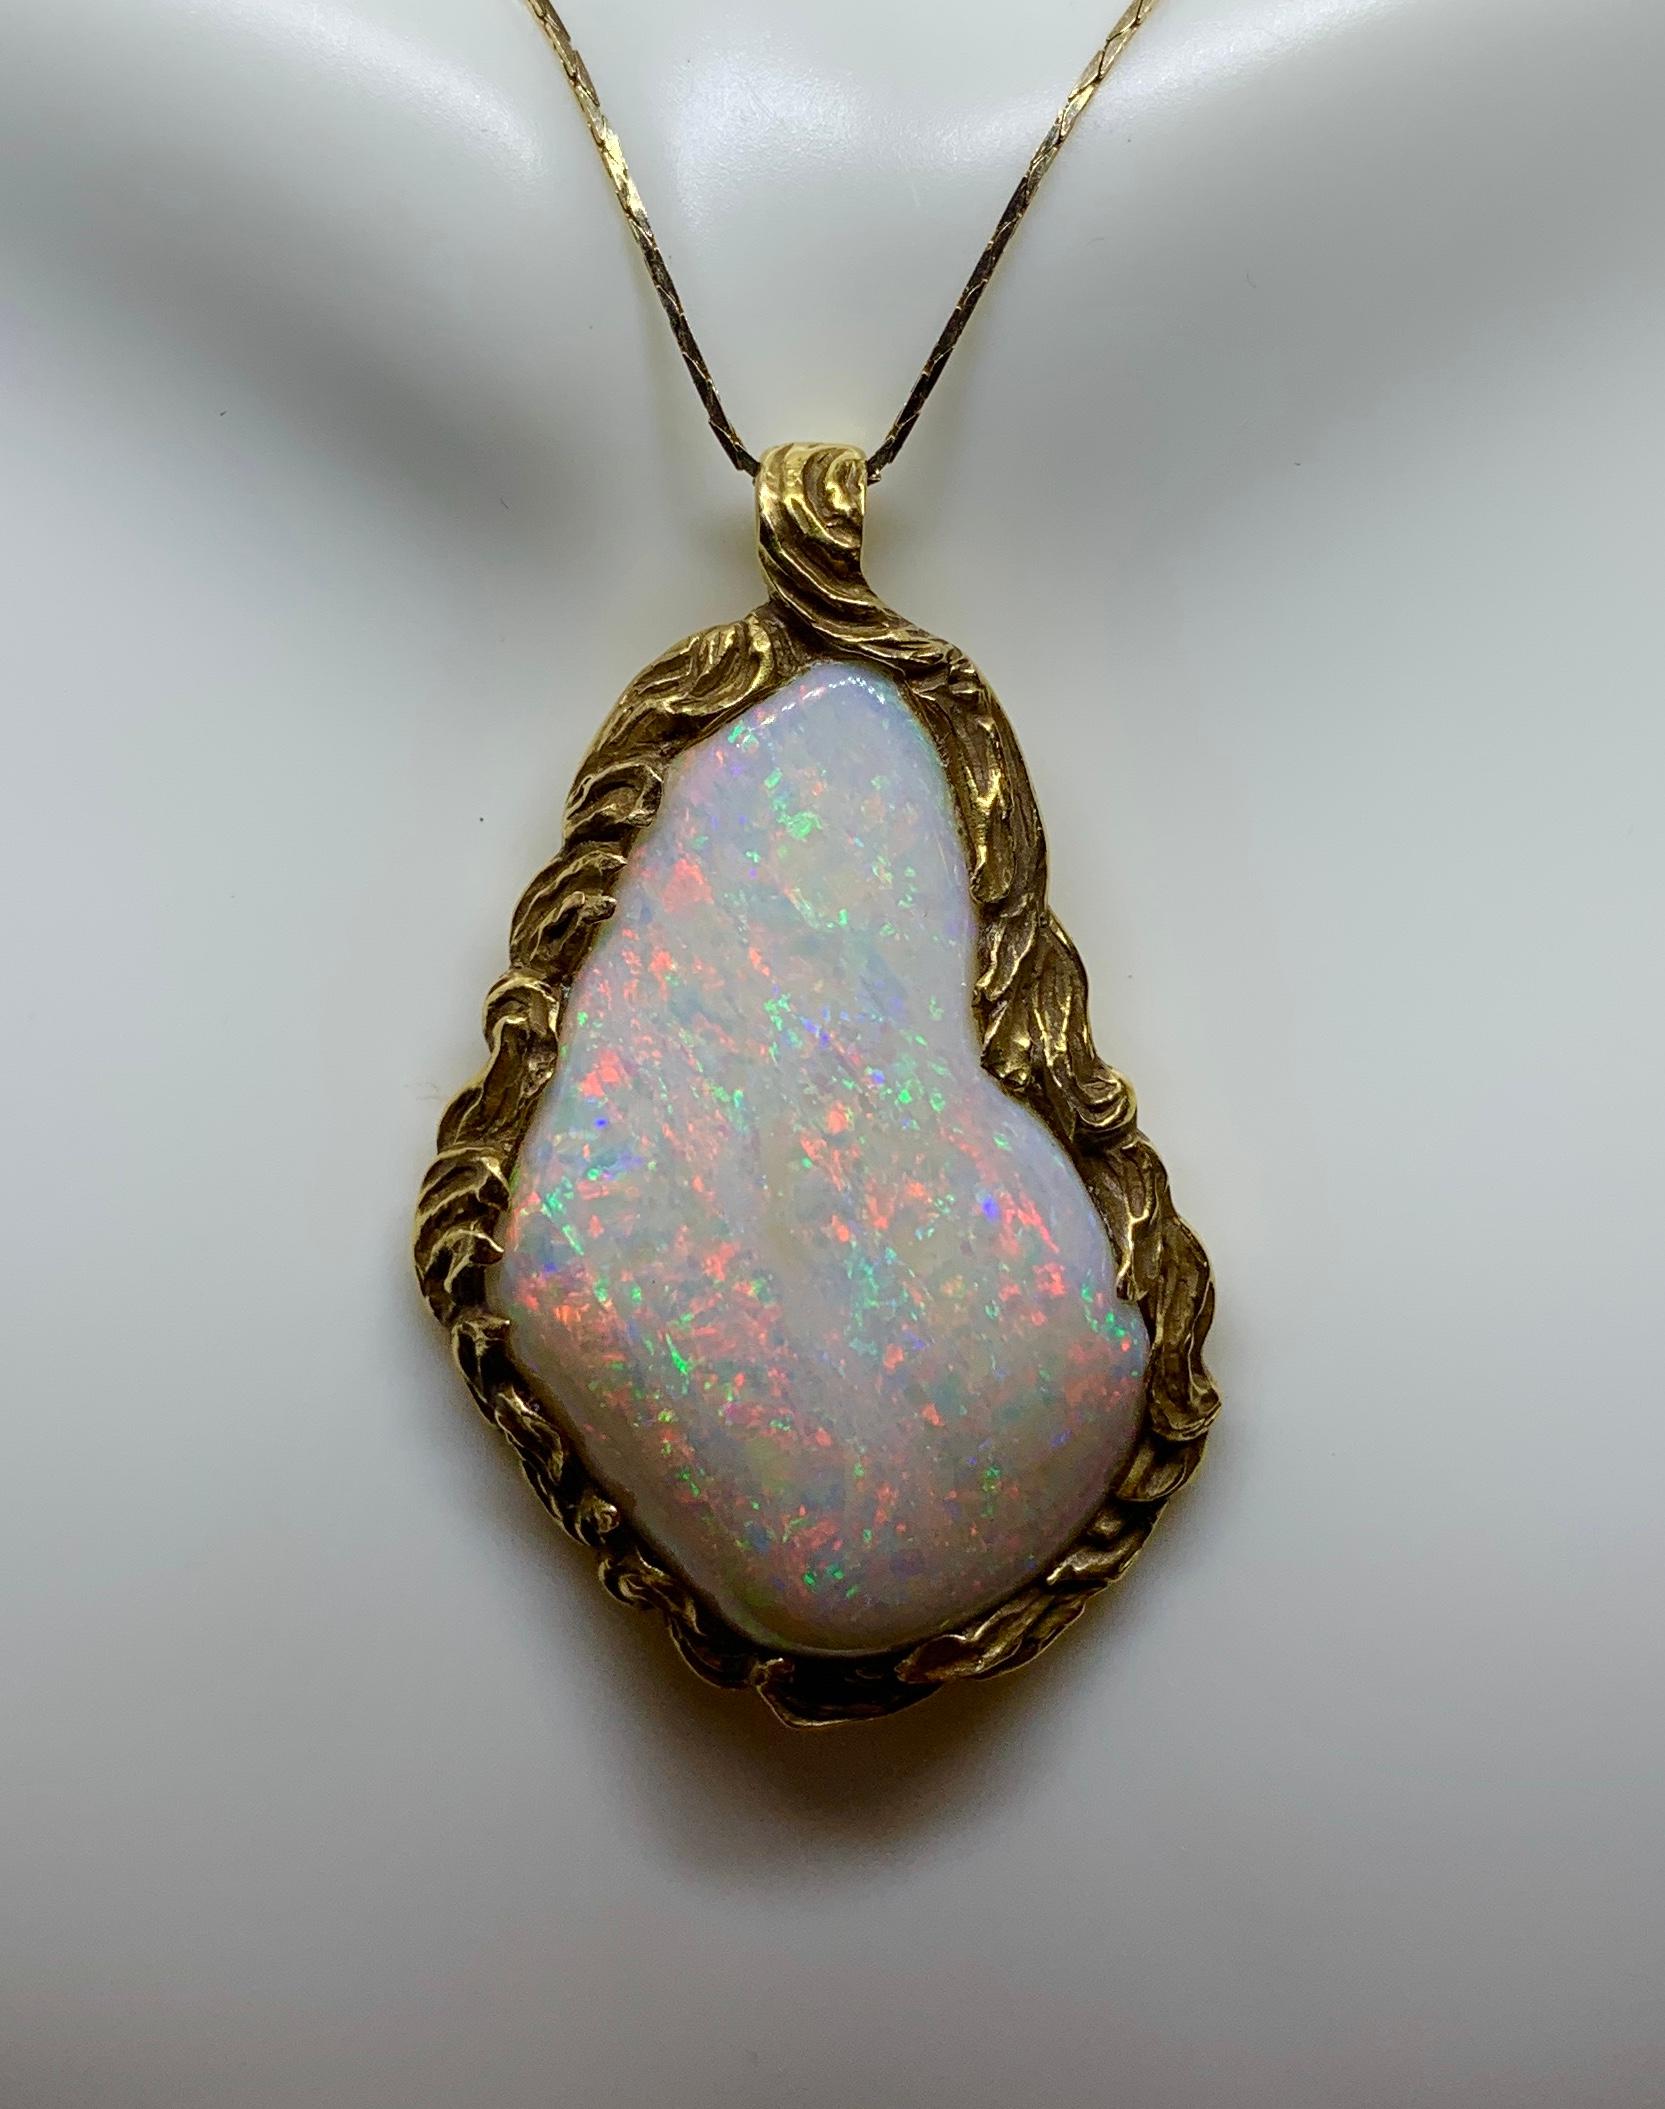 30 Carat Opal Pendant Necklace Red Fire 14 Karat Gold Antique Retro In Excellent Condition For Sale In New York, NY